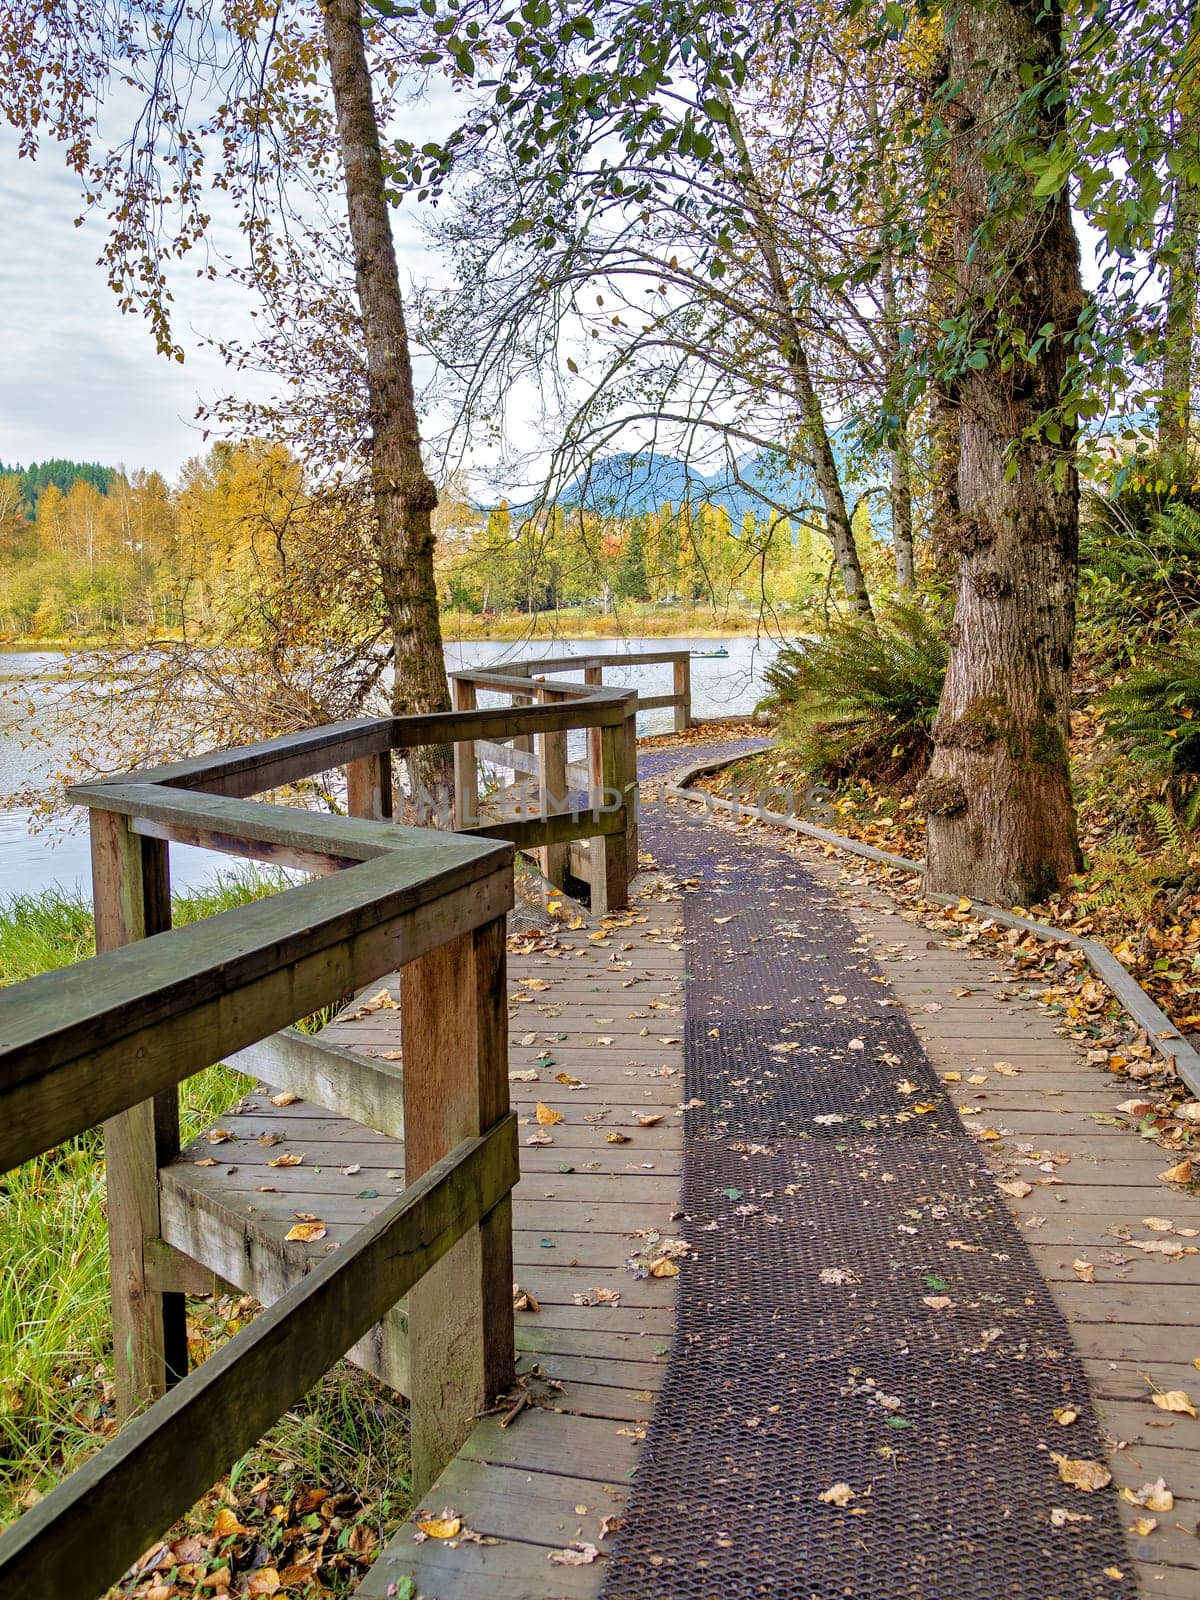 Plank floor of the walkway along Lafarge lake in Coquitlam, BC, Canada by Imagenet